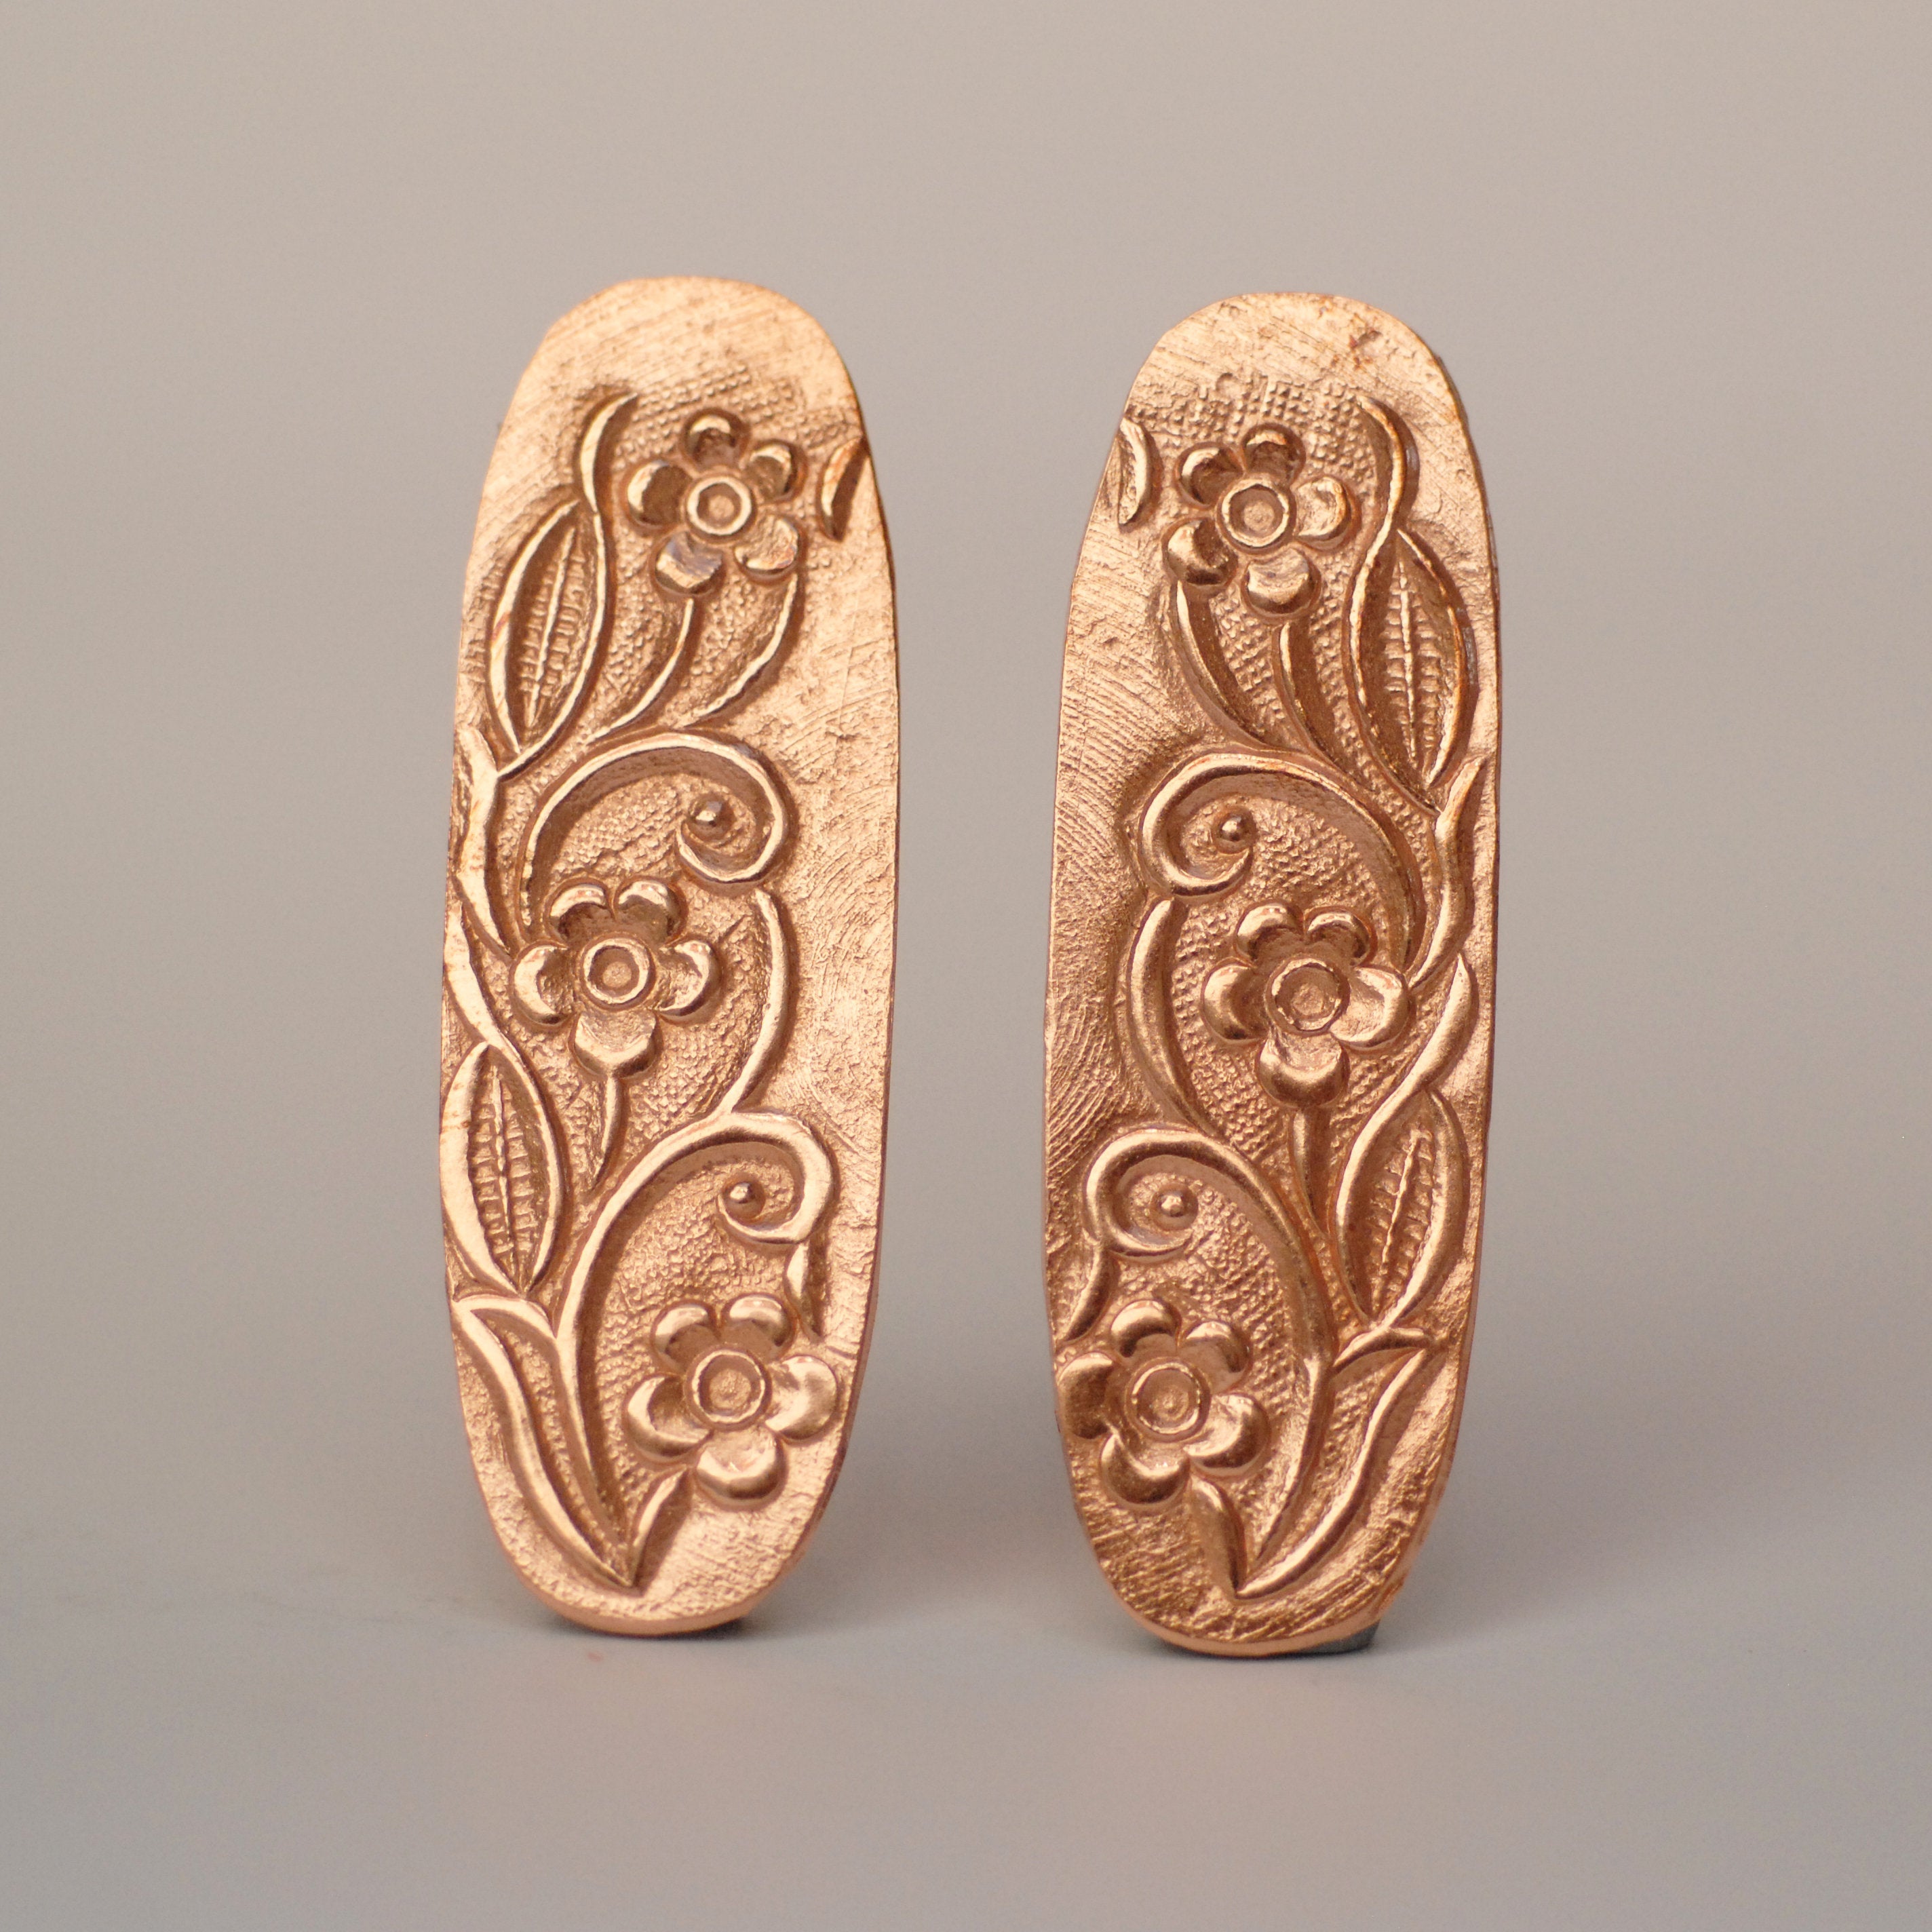 Freeform oval shapes w/ floral texture metal blanks - Solid copper